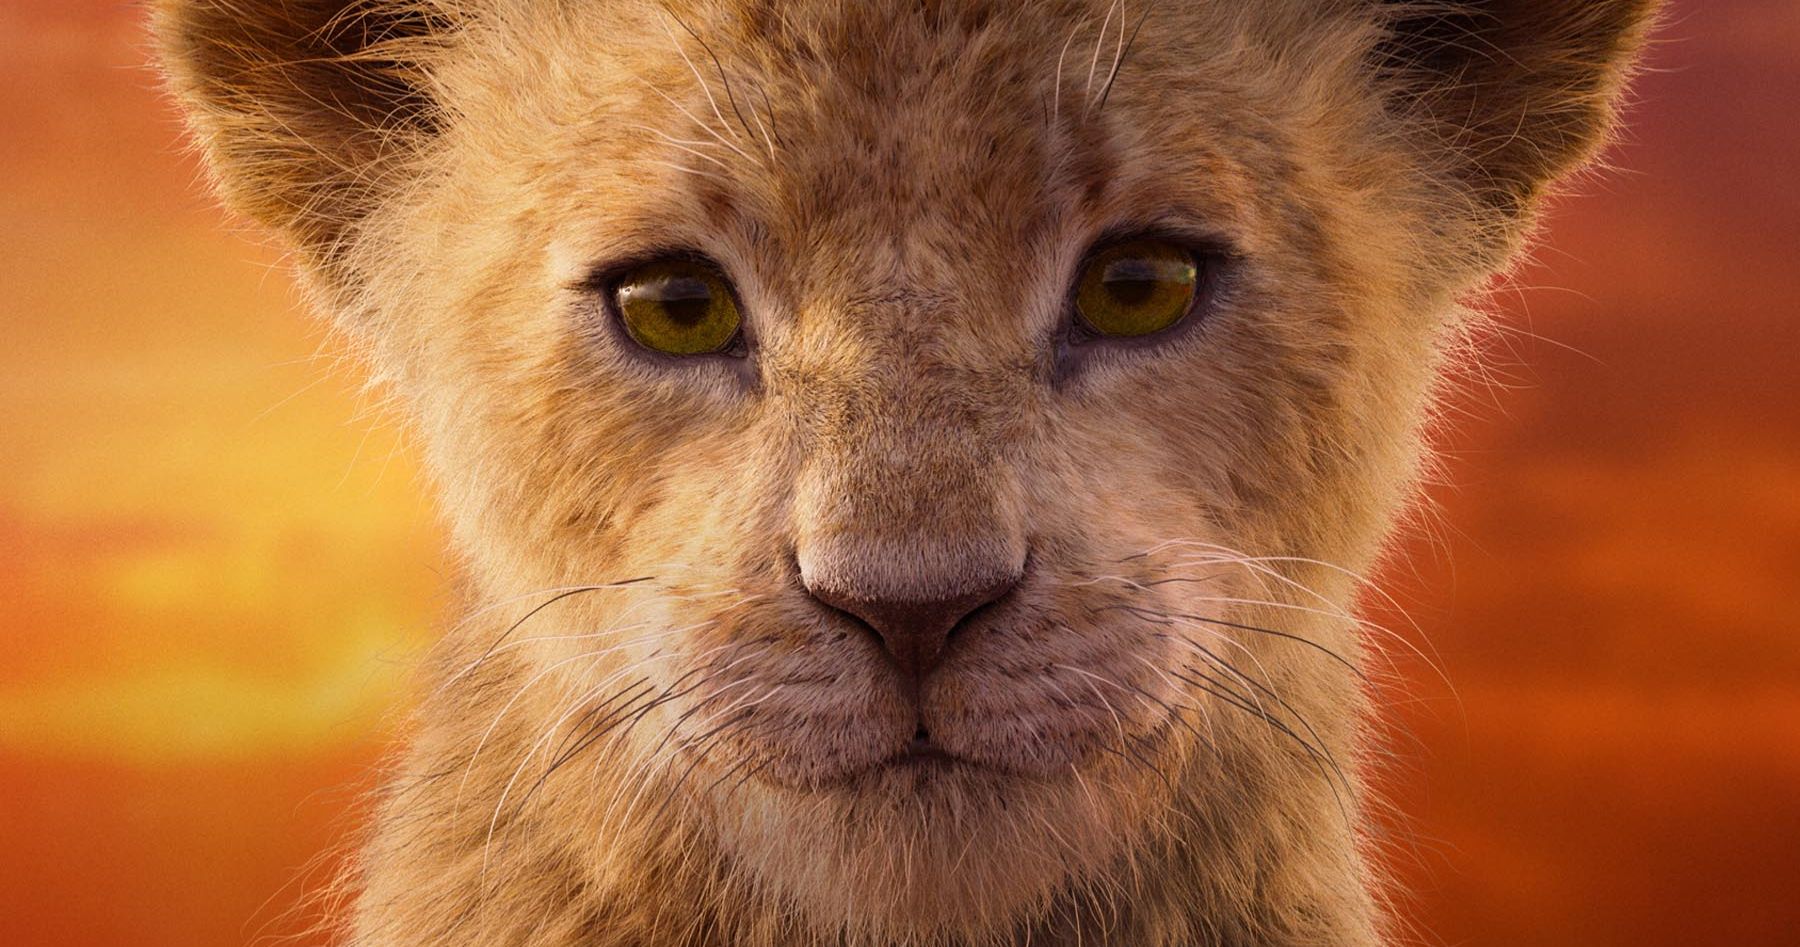 Hear Beyonce &amp; Donald Glover's Can You Feel the Love Tonight in New Lion King TV Spot